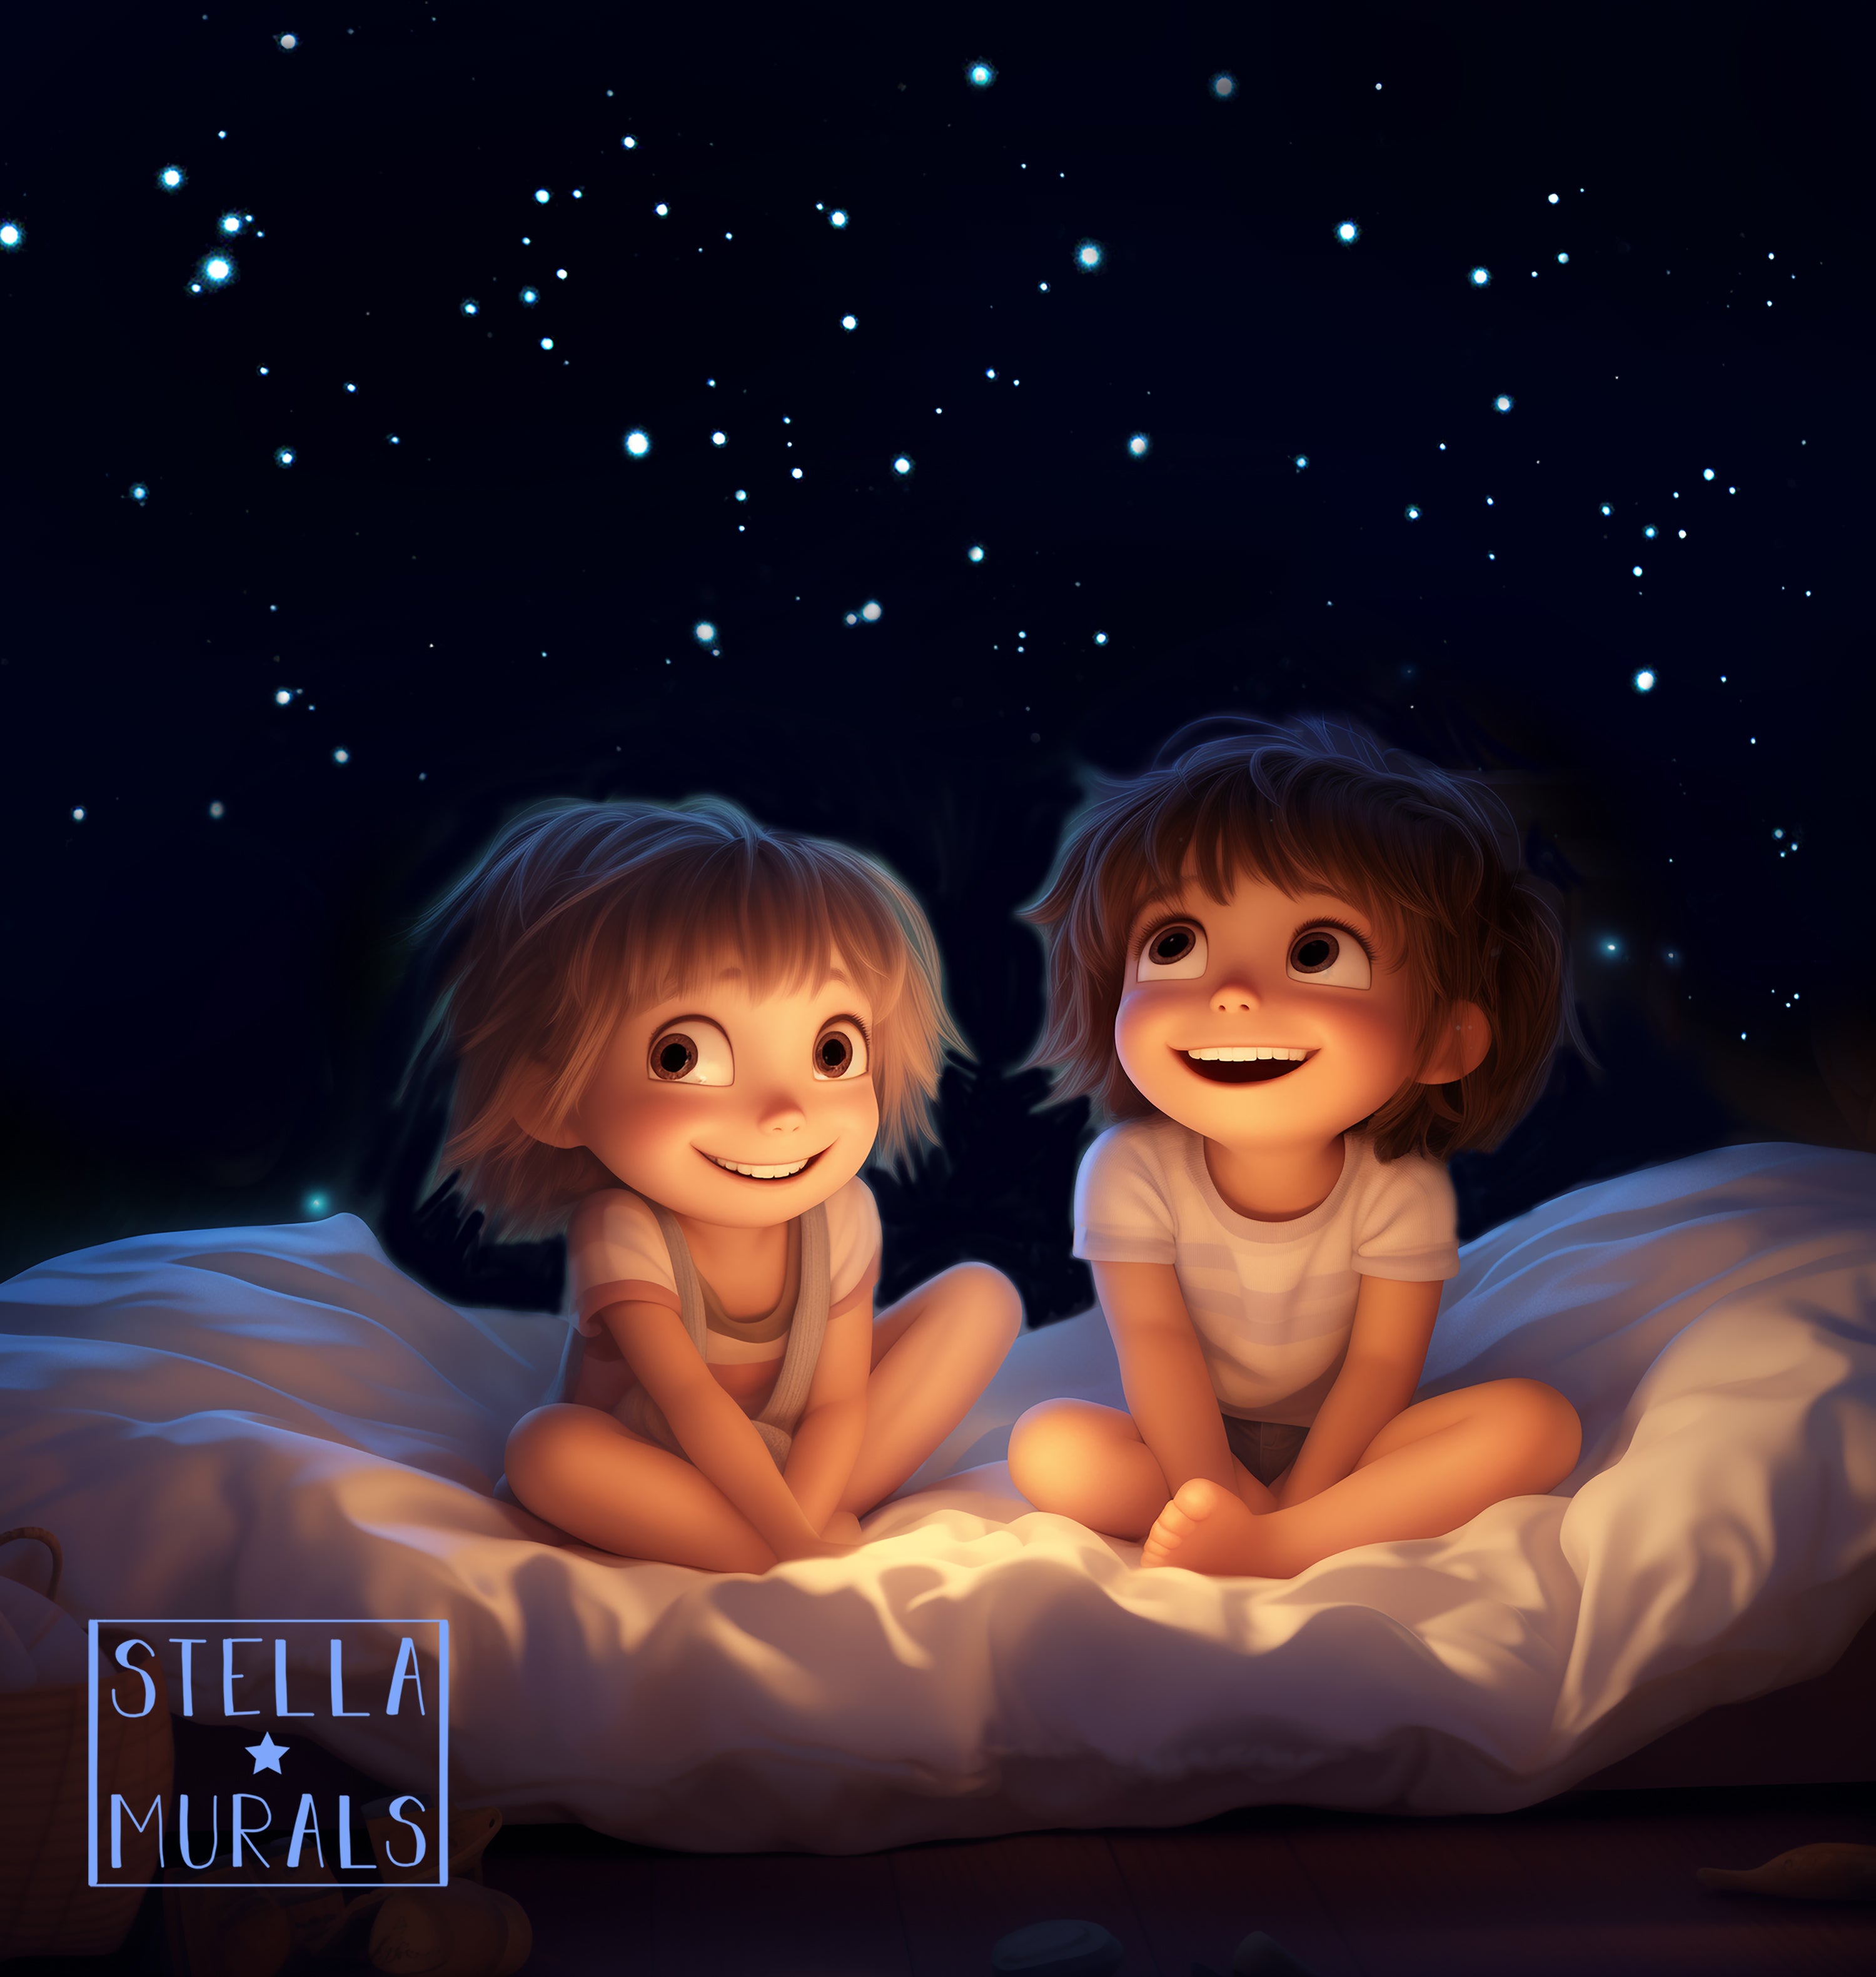 Two very cute little kids happily smiling at the glow in the dark star ceiling in their bedroom. 